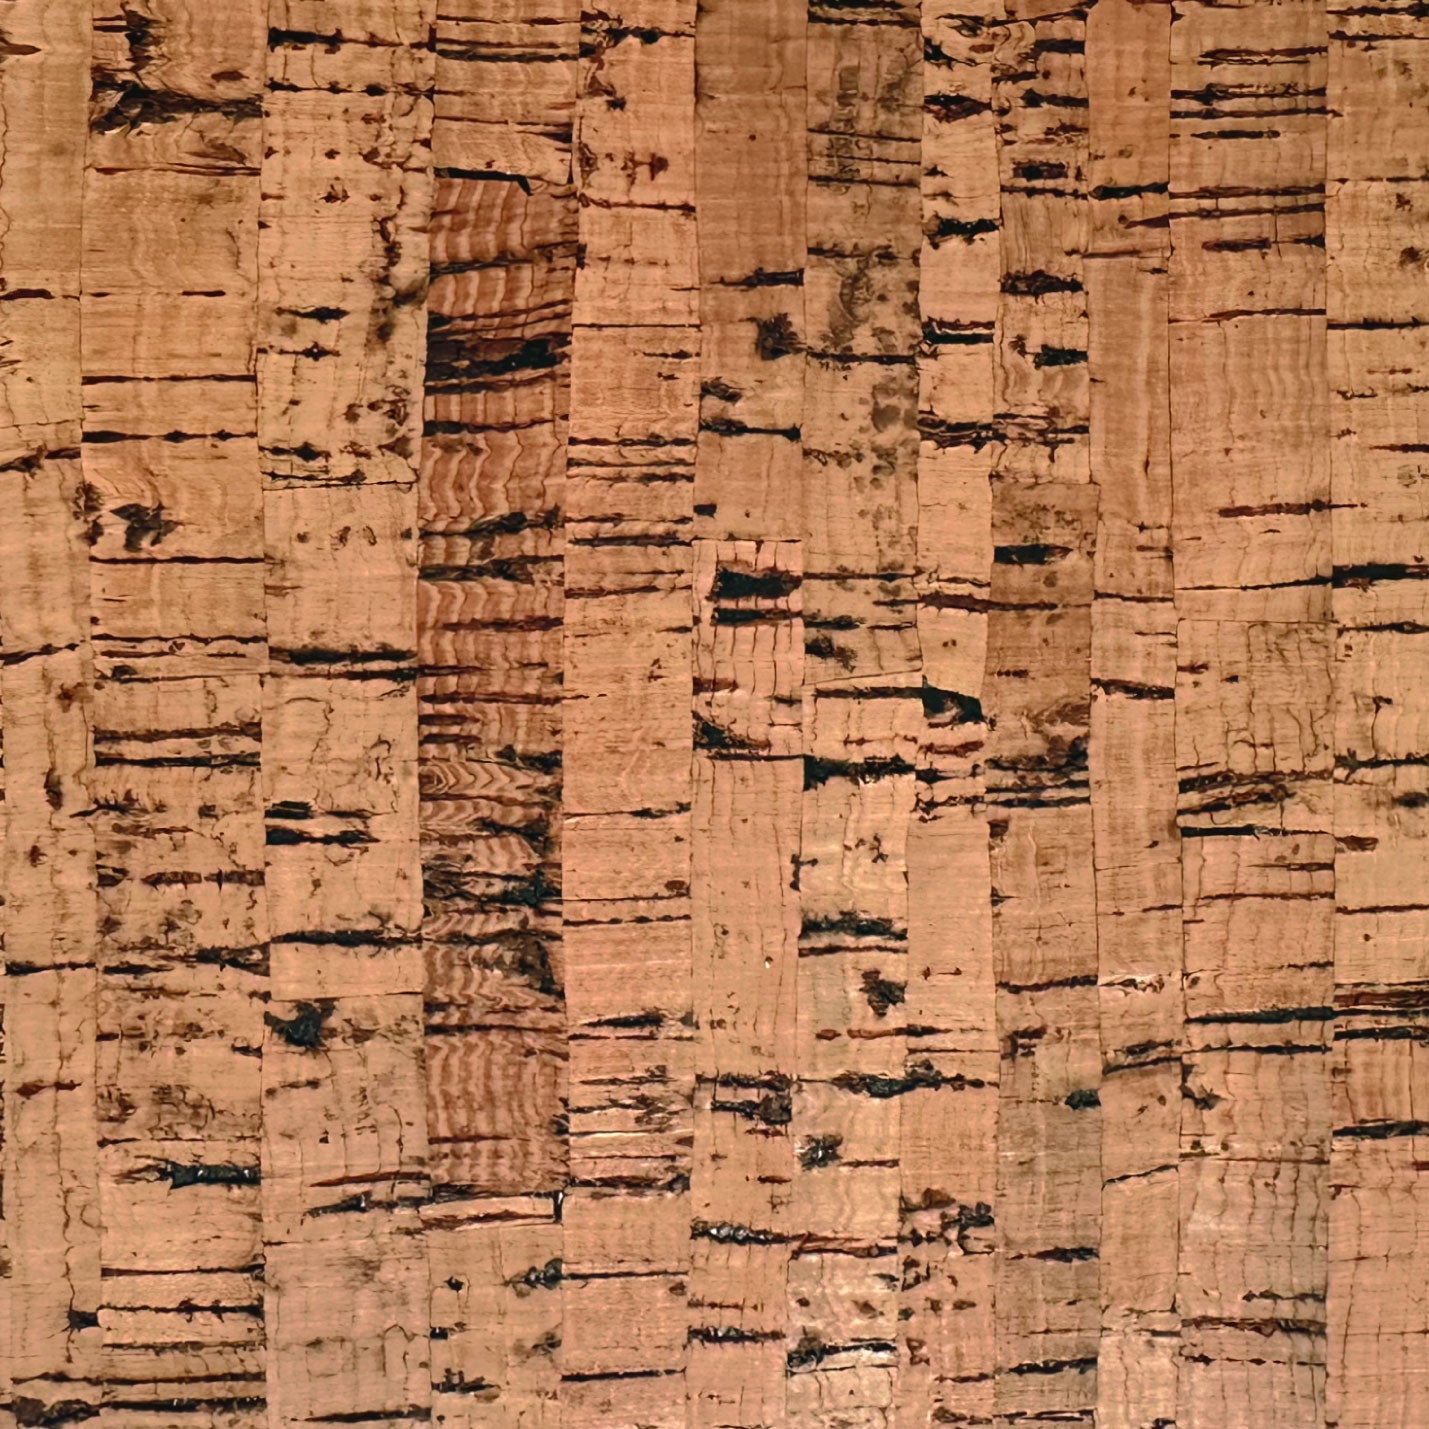 Natural Textured Eco-Friendly Non-toxic High-quality Sustainable practices Sustainability Interior Design Wall covering Bold Wallpaper Custom Tailor-made Retro chic cork nature luxury metallic shiny wood timeless coastal vacation interior design grain high-end brown grain shiny black